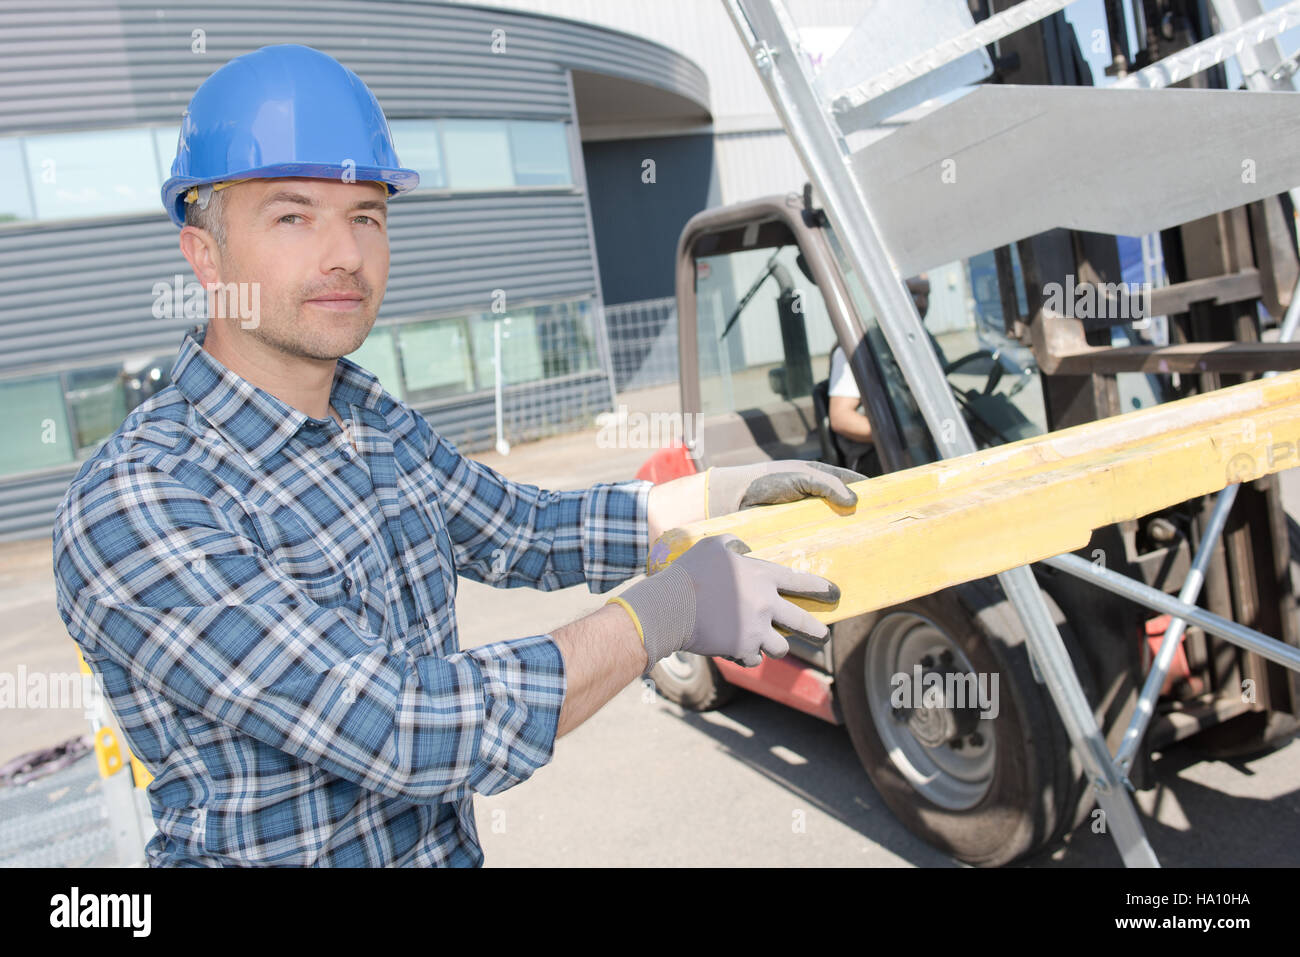 Worker loading wood on to forklift Stock Photo